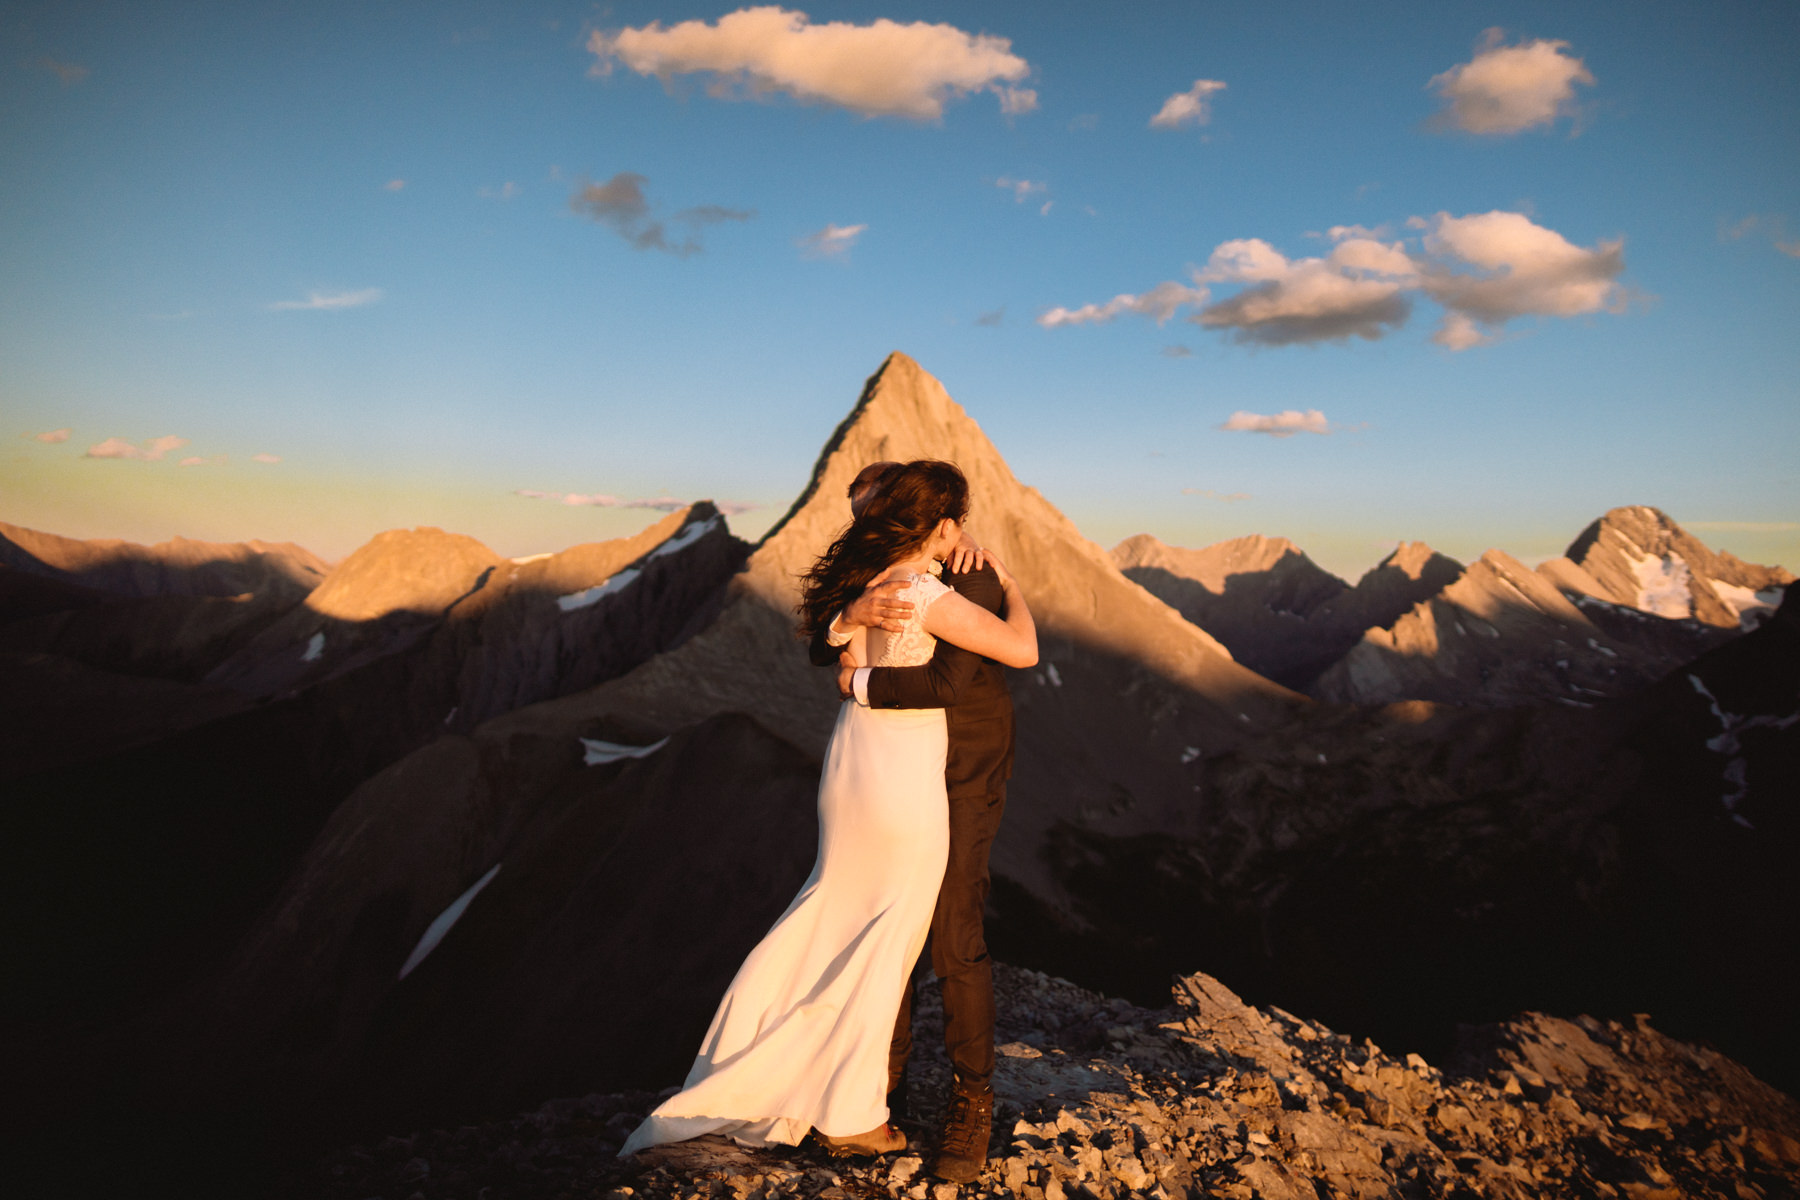 Canmore hiking elopement photographers - Image 52